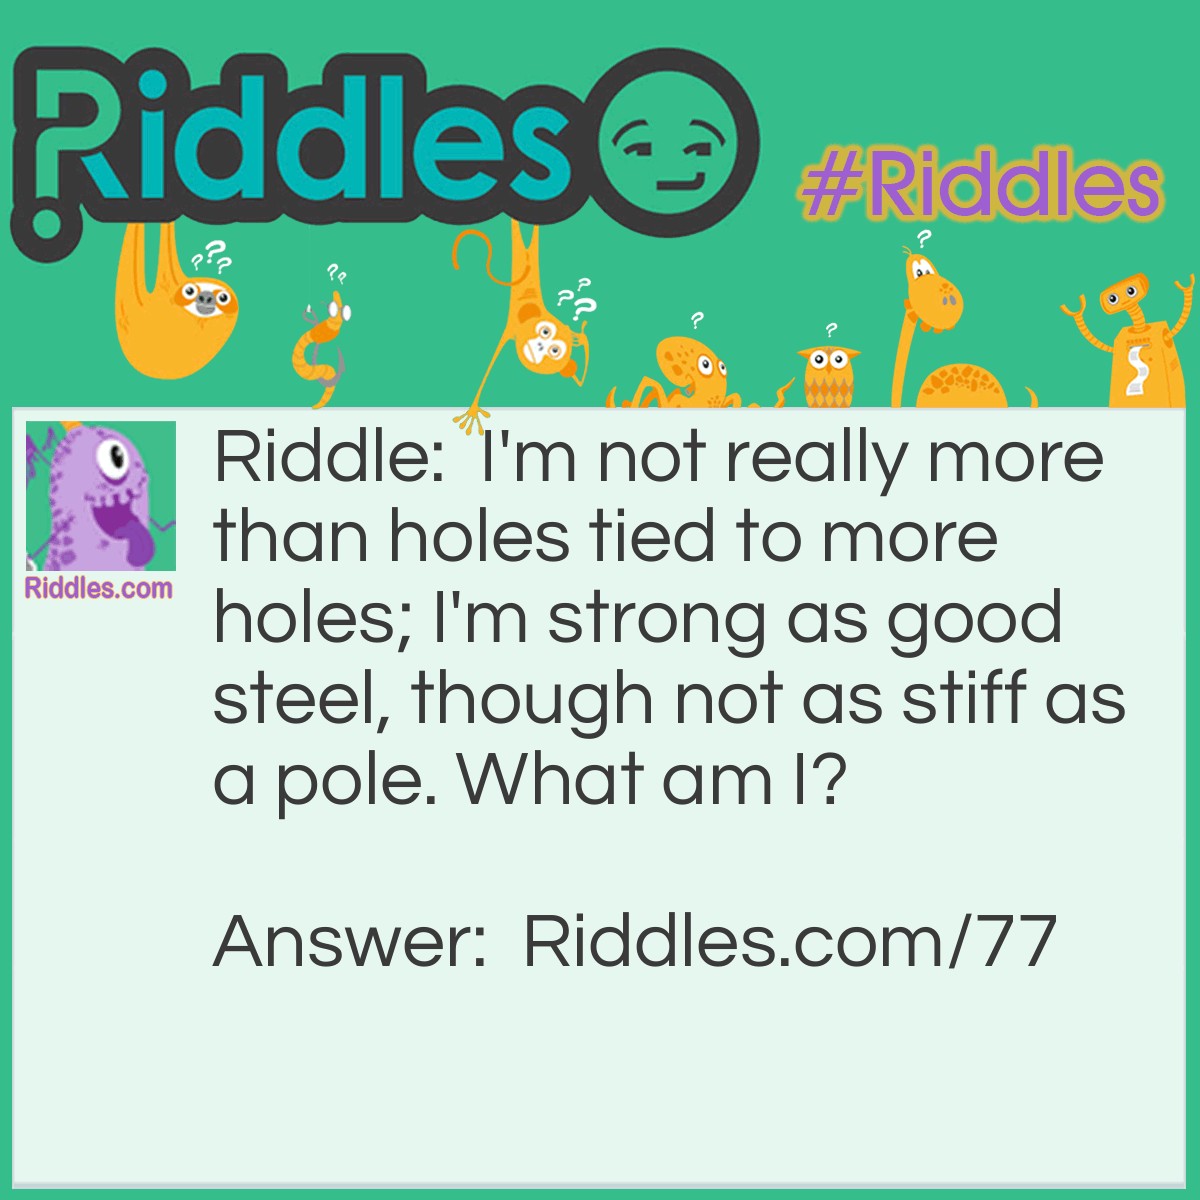 Riddle: I'm not really more than holes tied to more holes; I'm strong as good steel, though not as stiff as a pole. What am I? Answer: A steel chain.